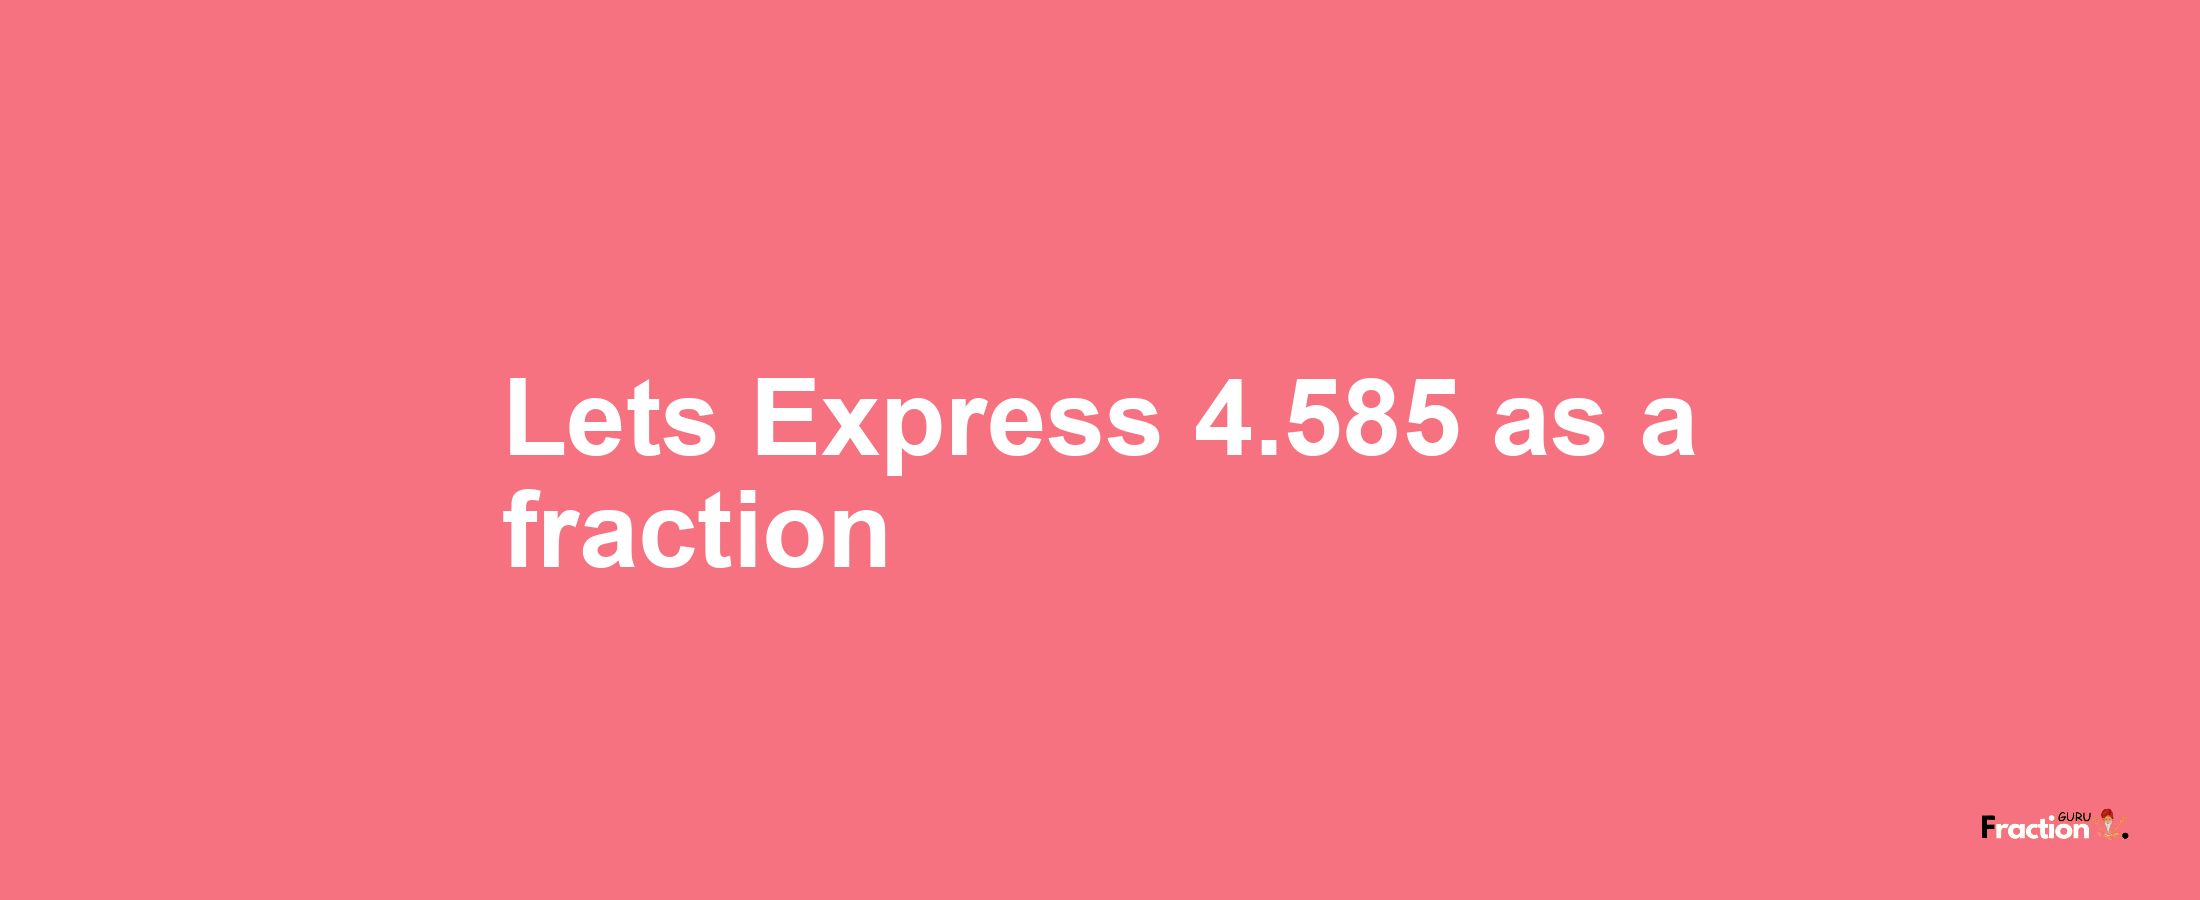 Lets Express 4.585 as afraction